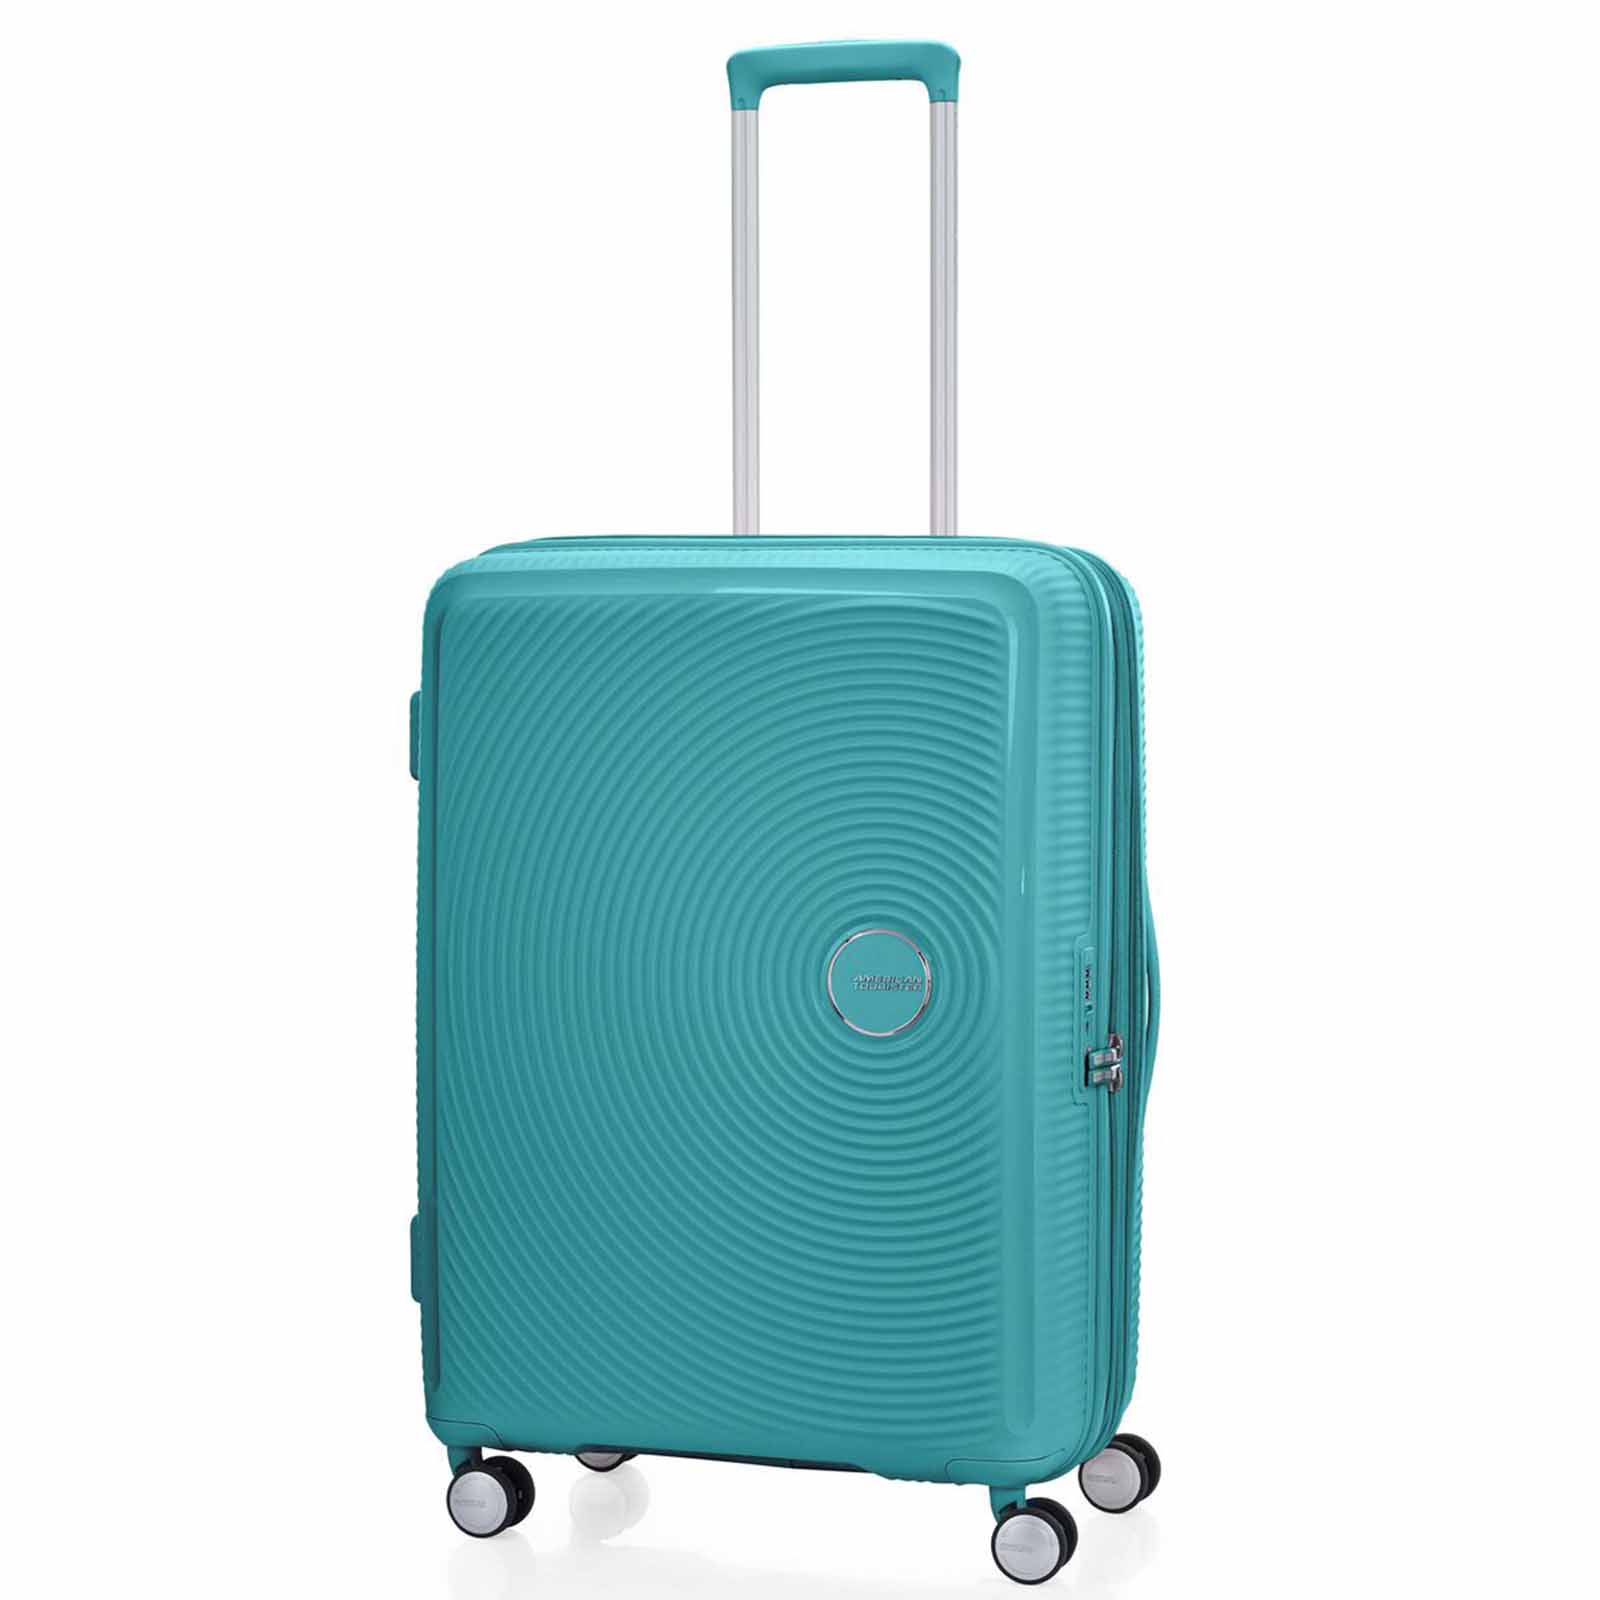 American-Tourister-Curio-2-69cm-Suitcase-Jade-Green-Front-Angle